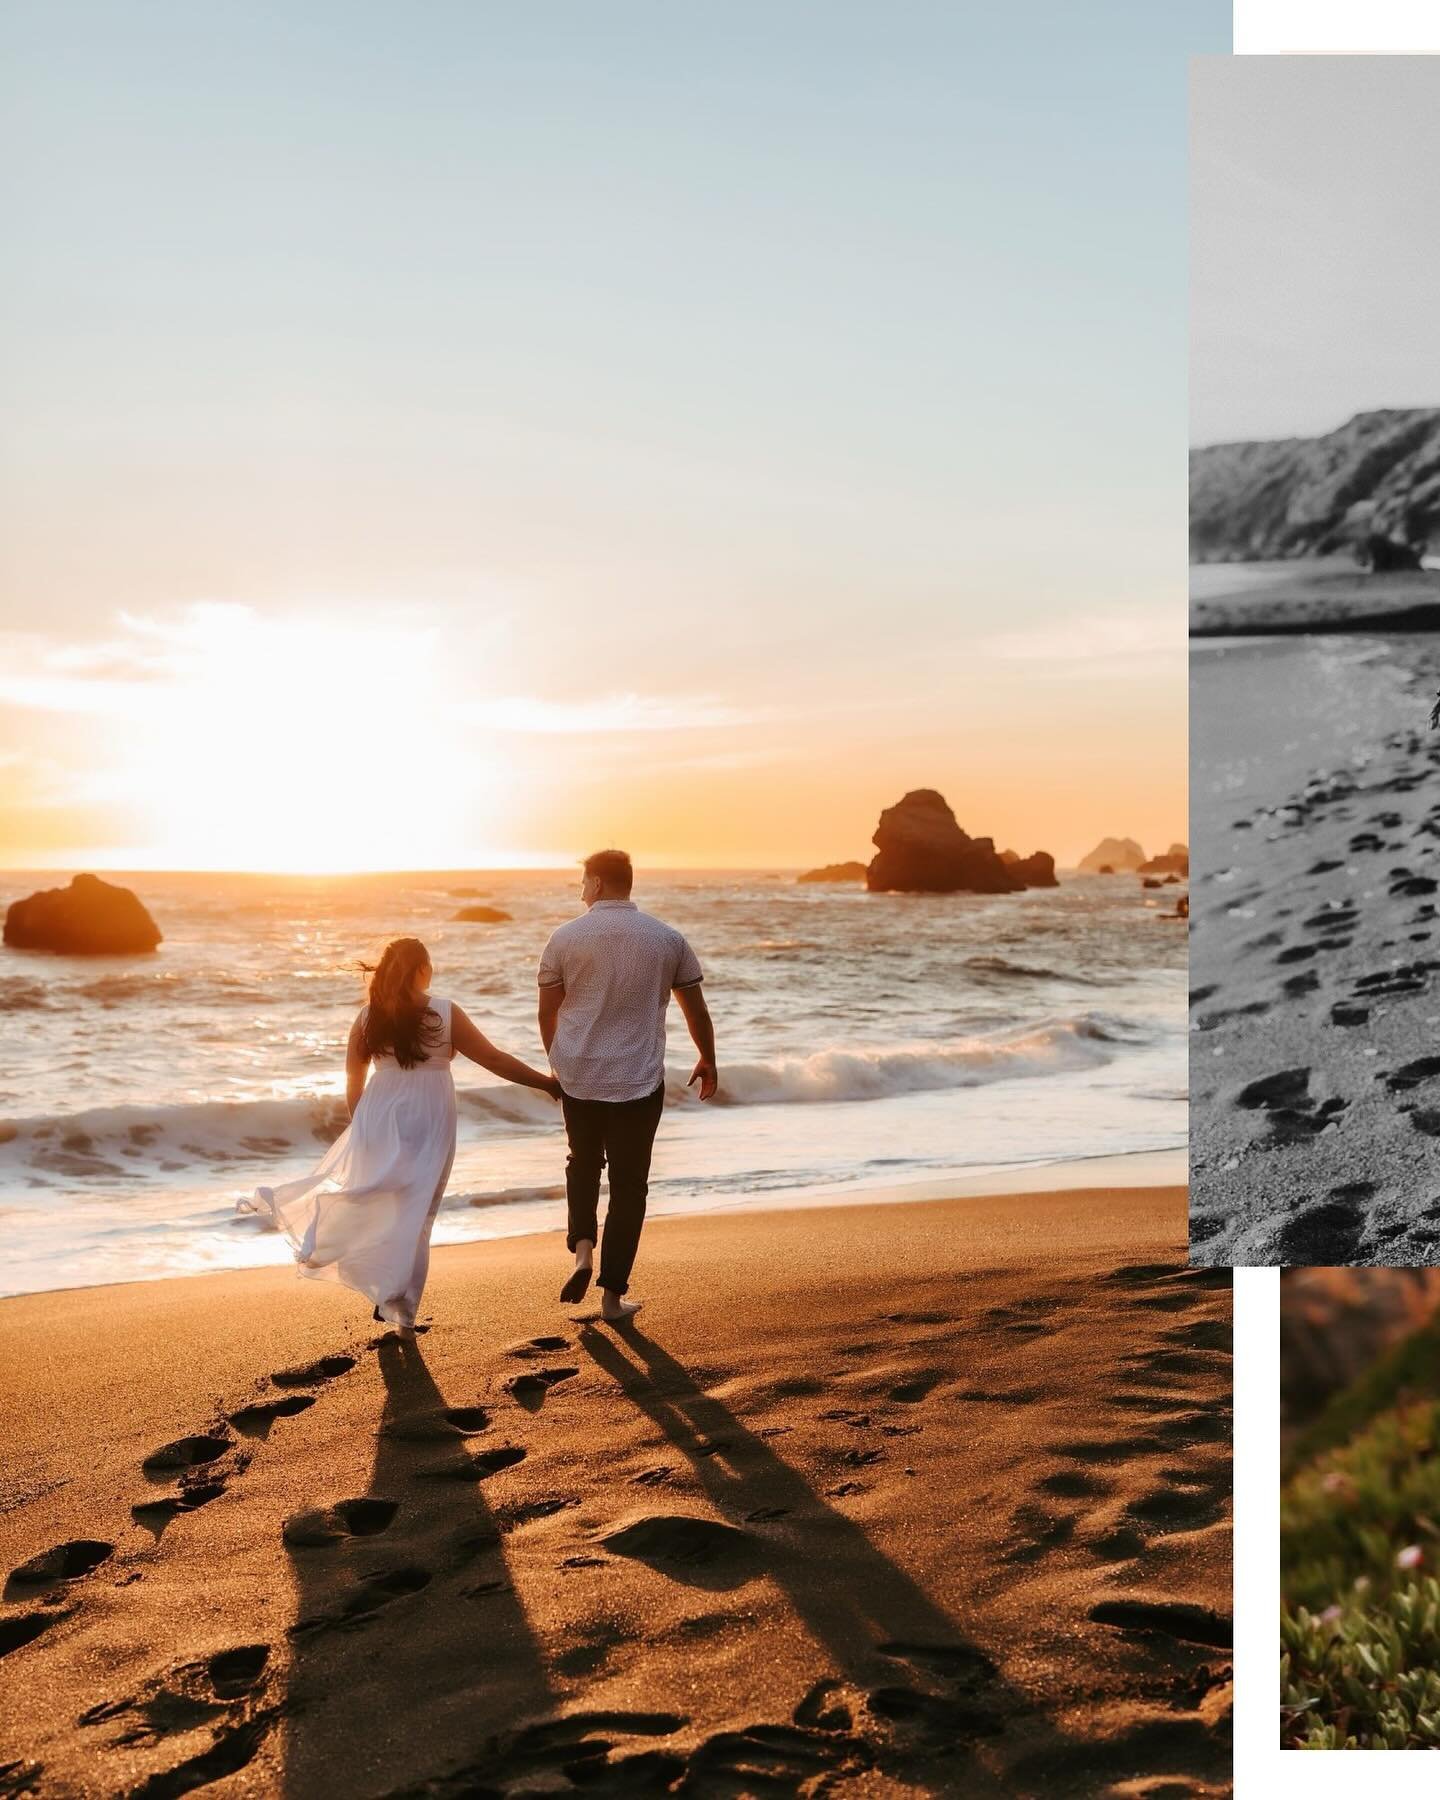 How many favorite photos can you post at a time? Asking for a friend 😝😍
&hellip;
..
&hellip;
.
..
#engagmentphotography #engaged #californiaweddingphotographer #subject_light #beachengagement #sonomacountyweddingphotographer #weddinginspo #californ